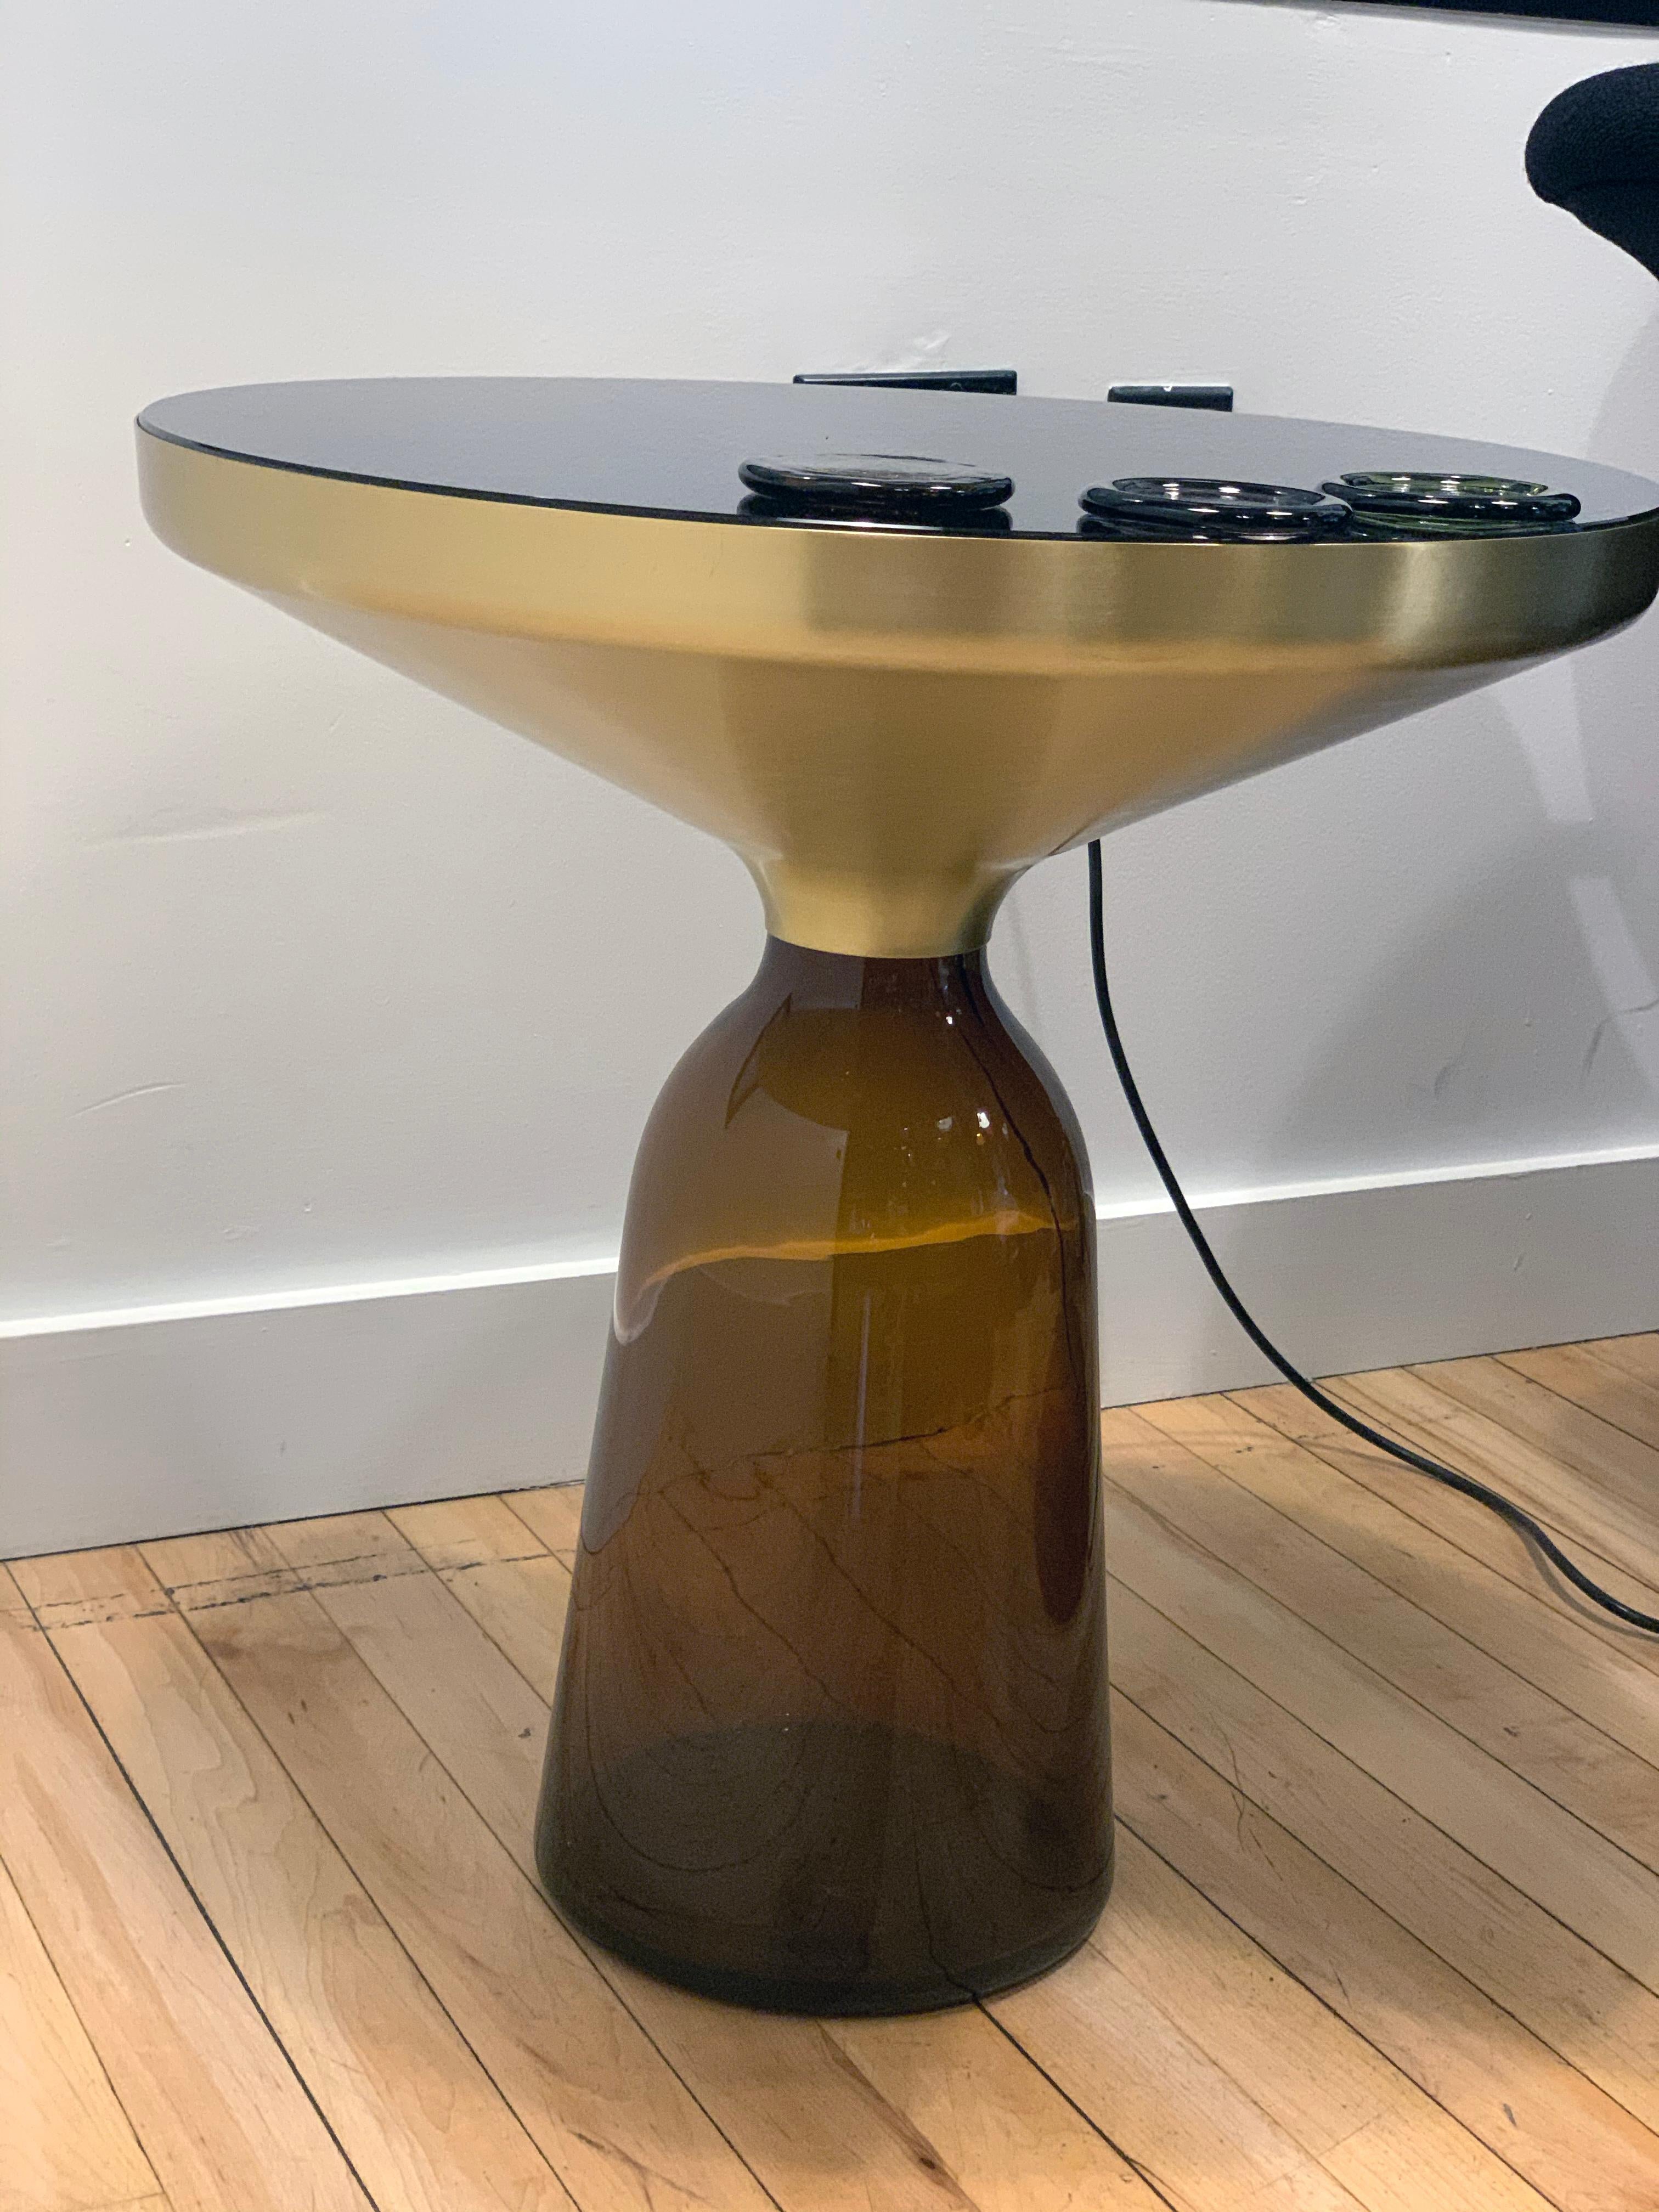 German ClassiCon Bell Side Table in Brass and Amber Designed by Sebastian Herkner